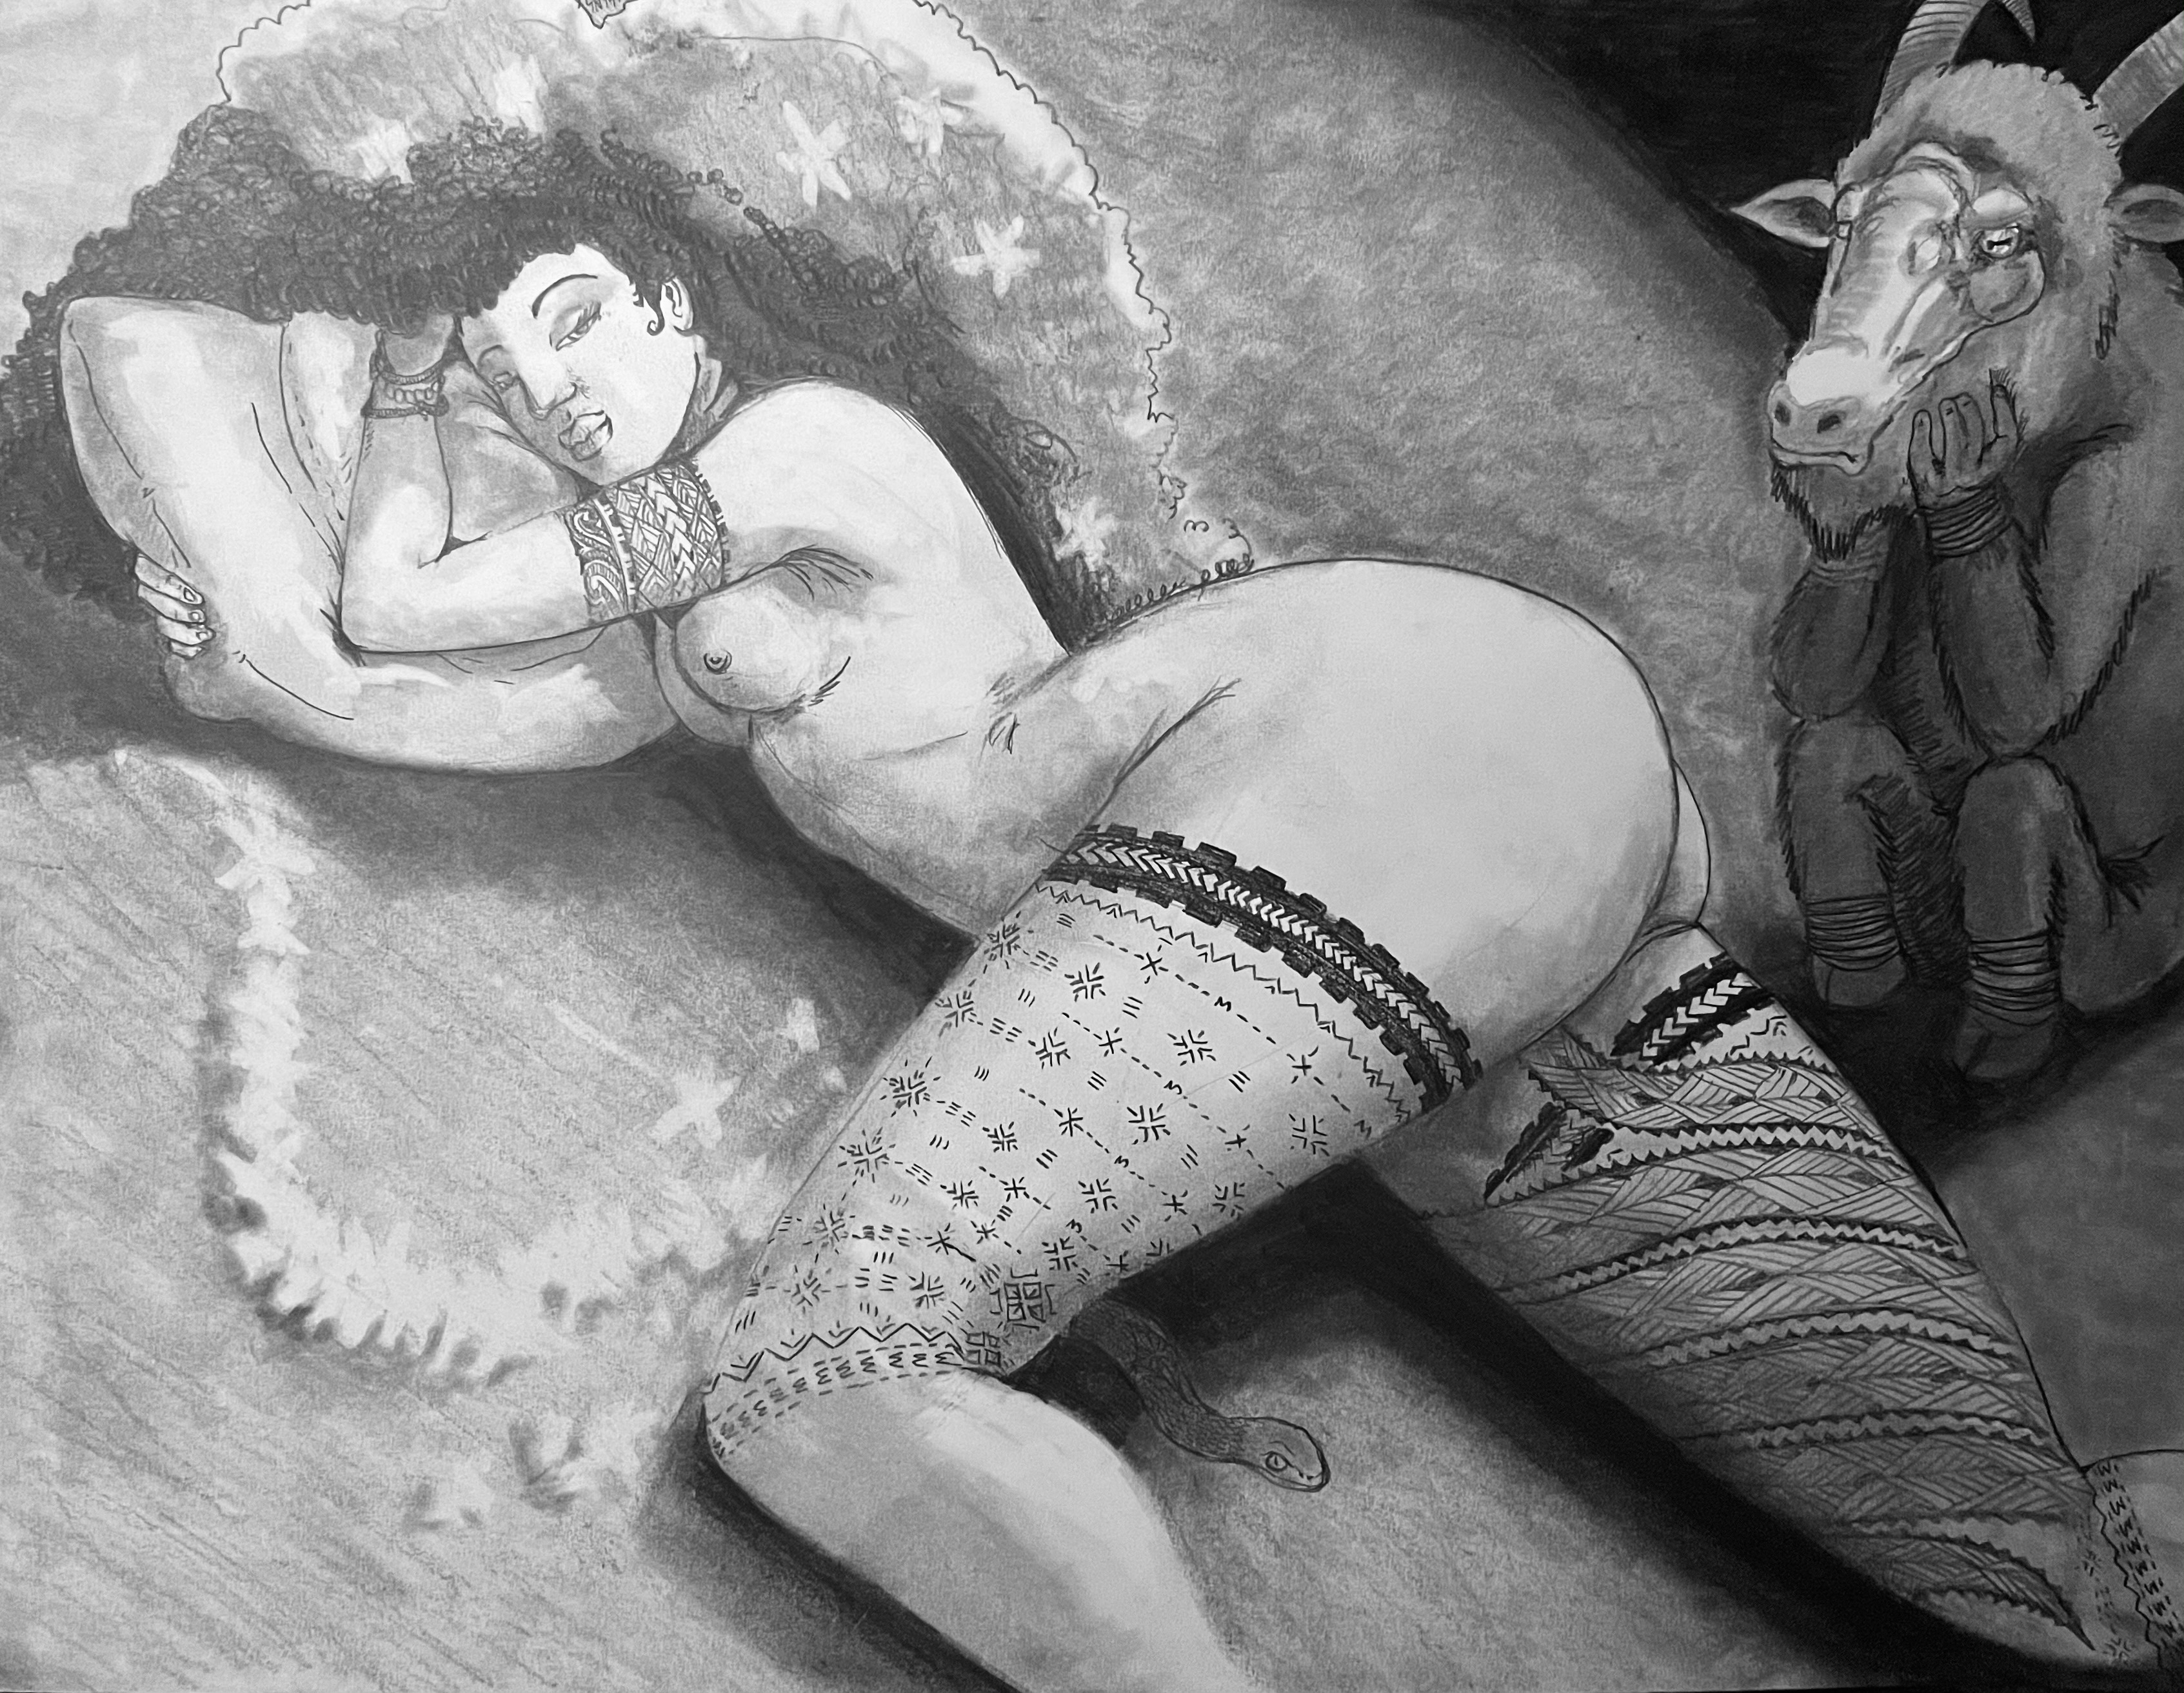 Lust graphite drawing.